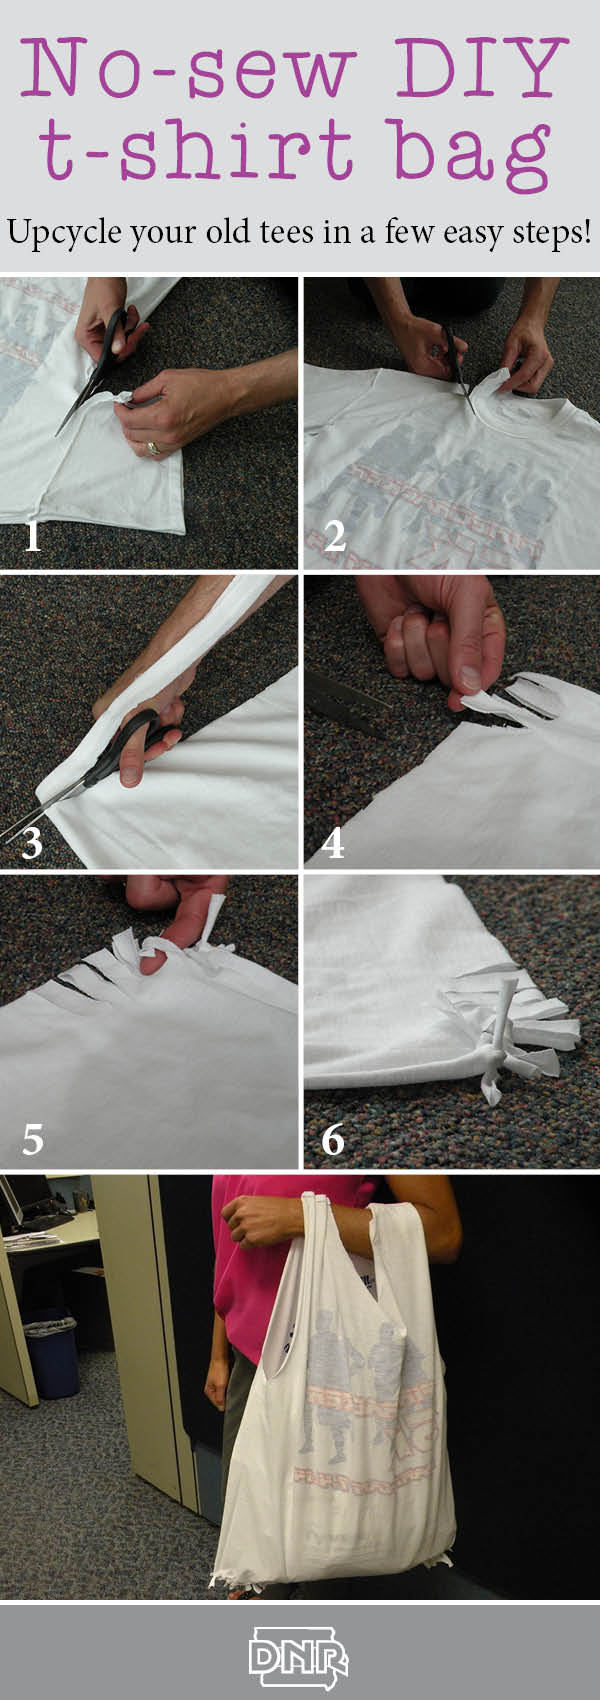 Upcycle that old shirt with this no-sew t-shirt bag tutorial from the Iowa DNR